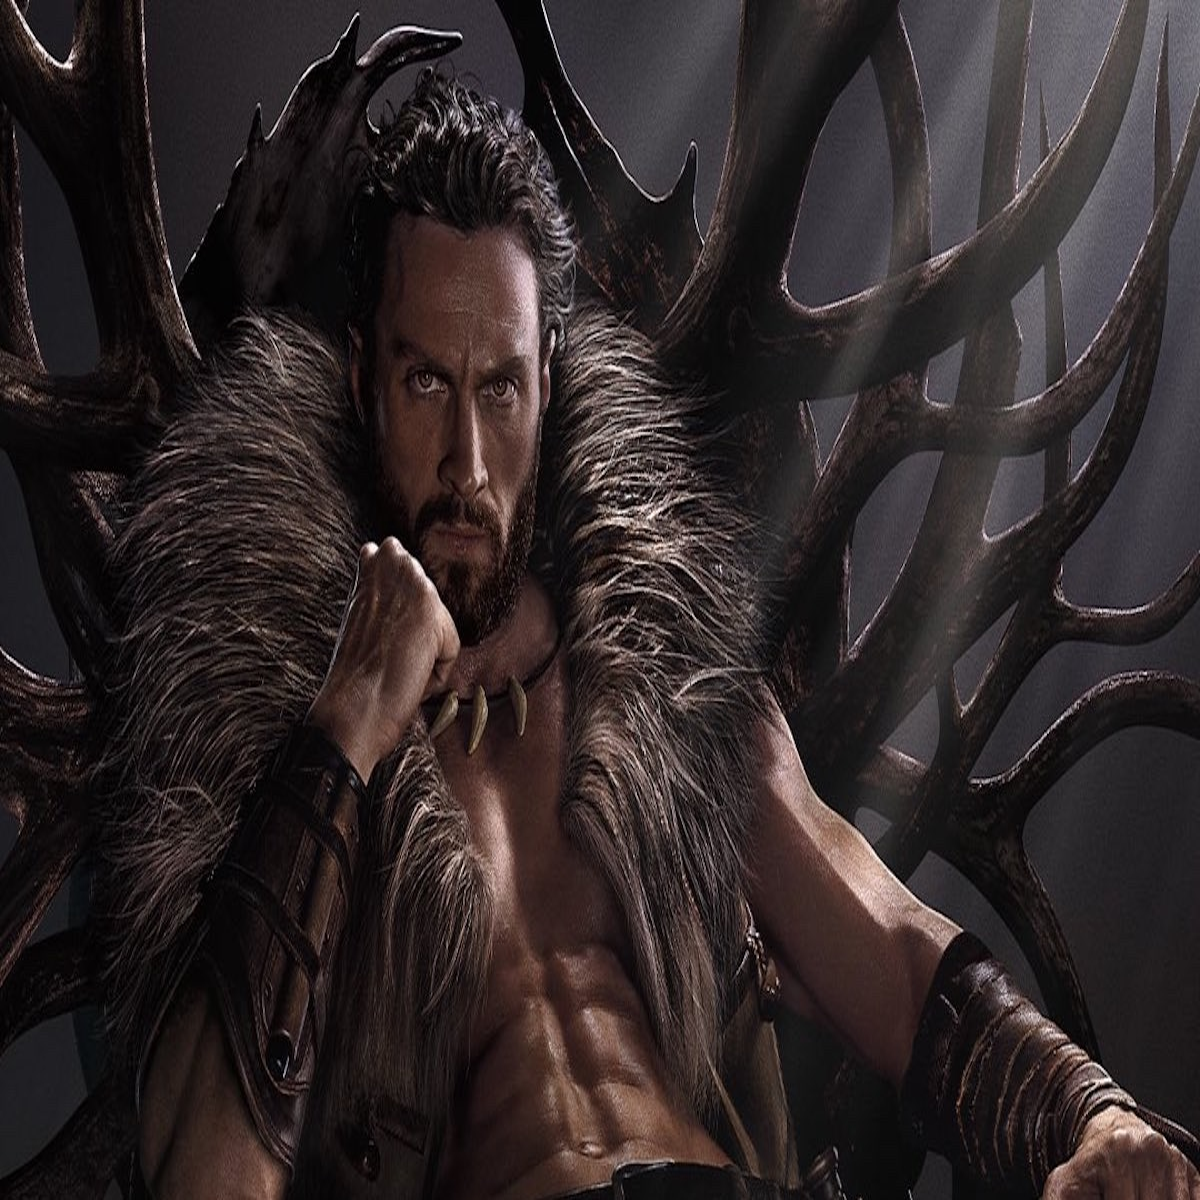 Star of Kraven the Hunter movie shares details about the Spider